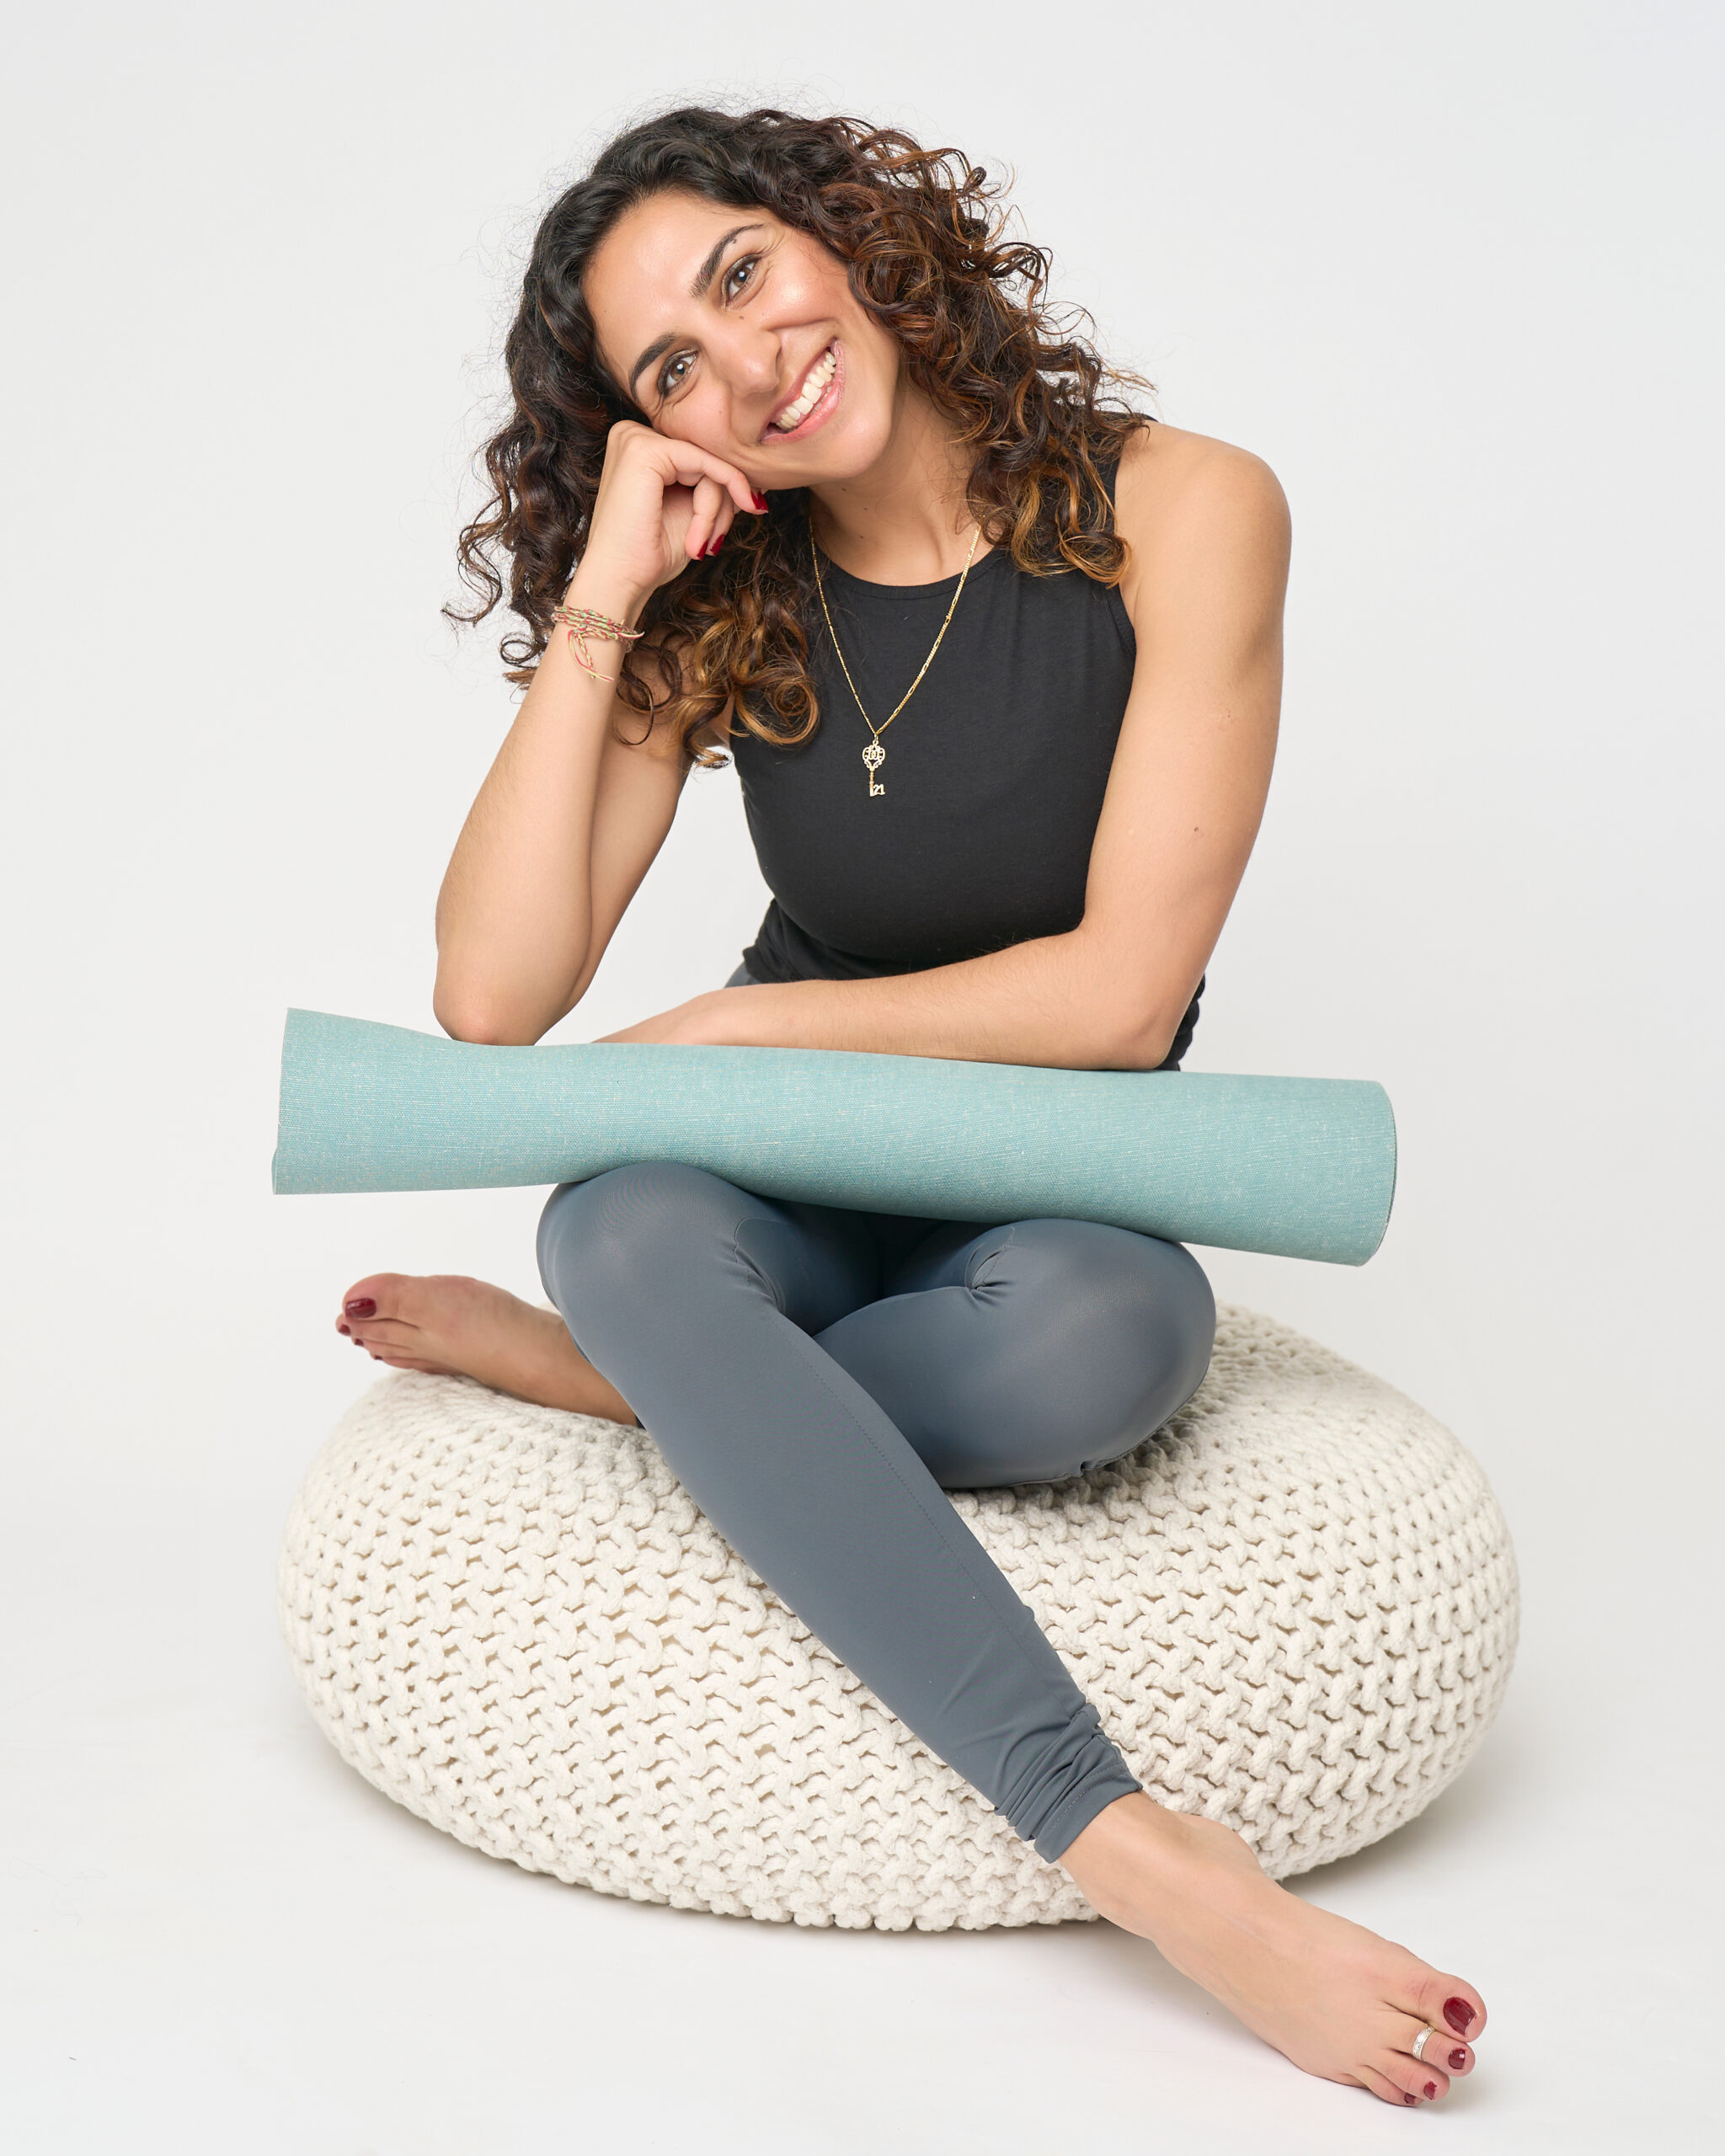 Dr Rabia sat on stool with yoga mat